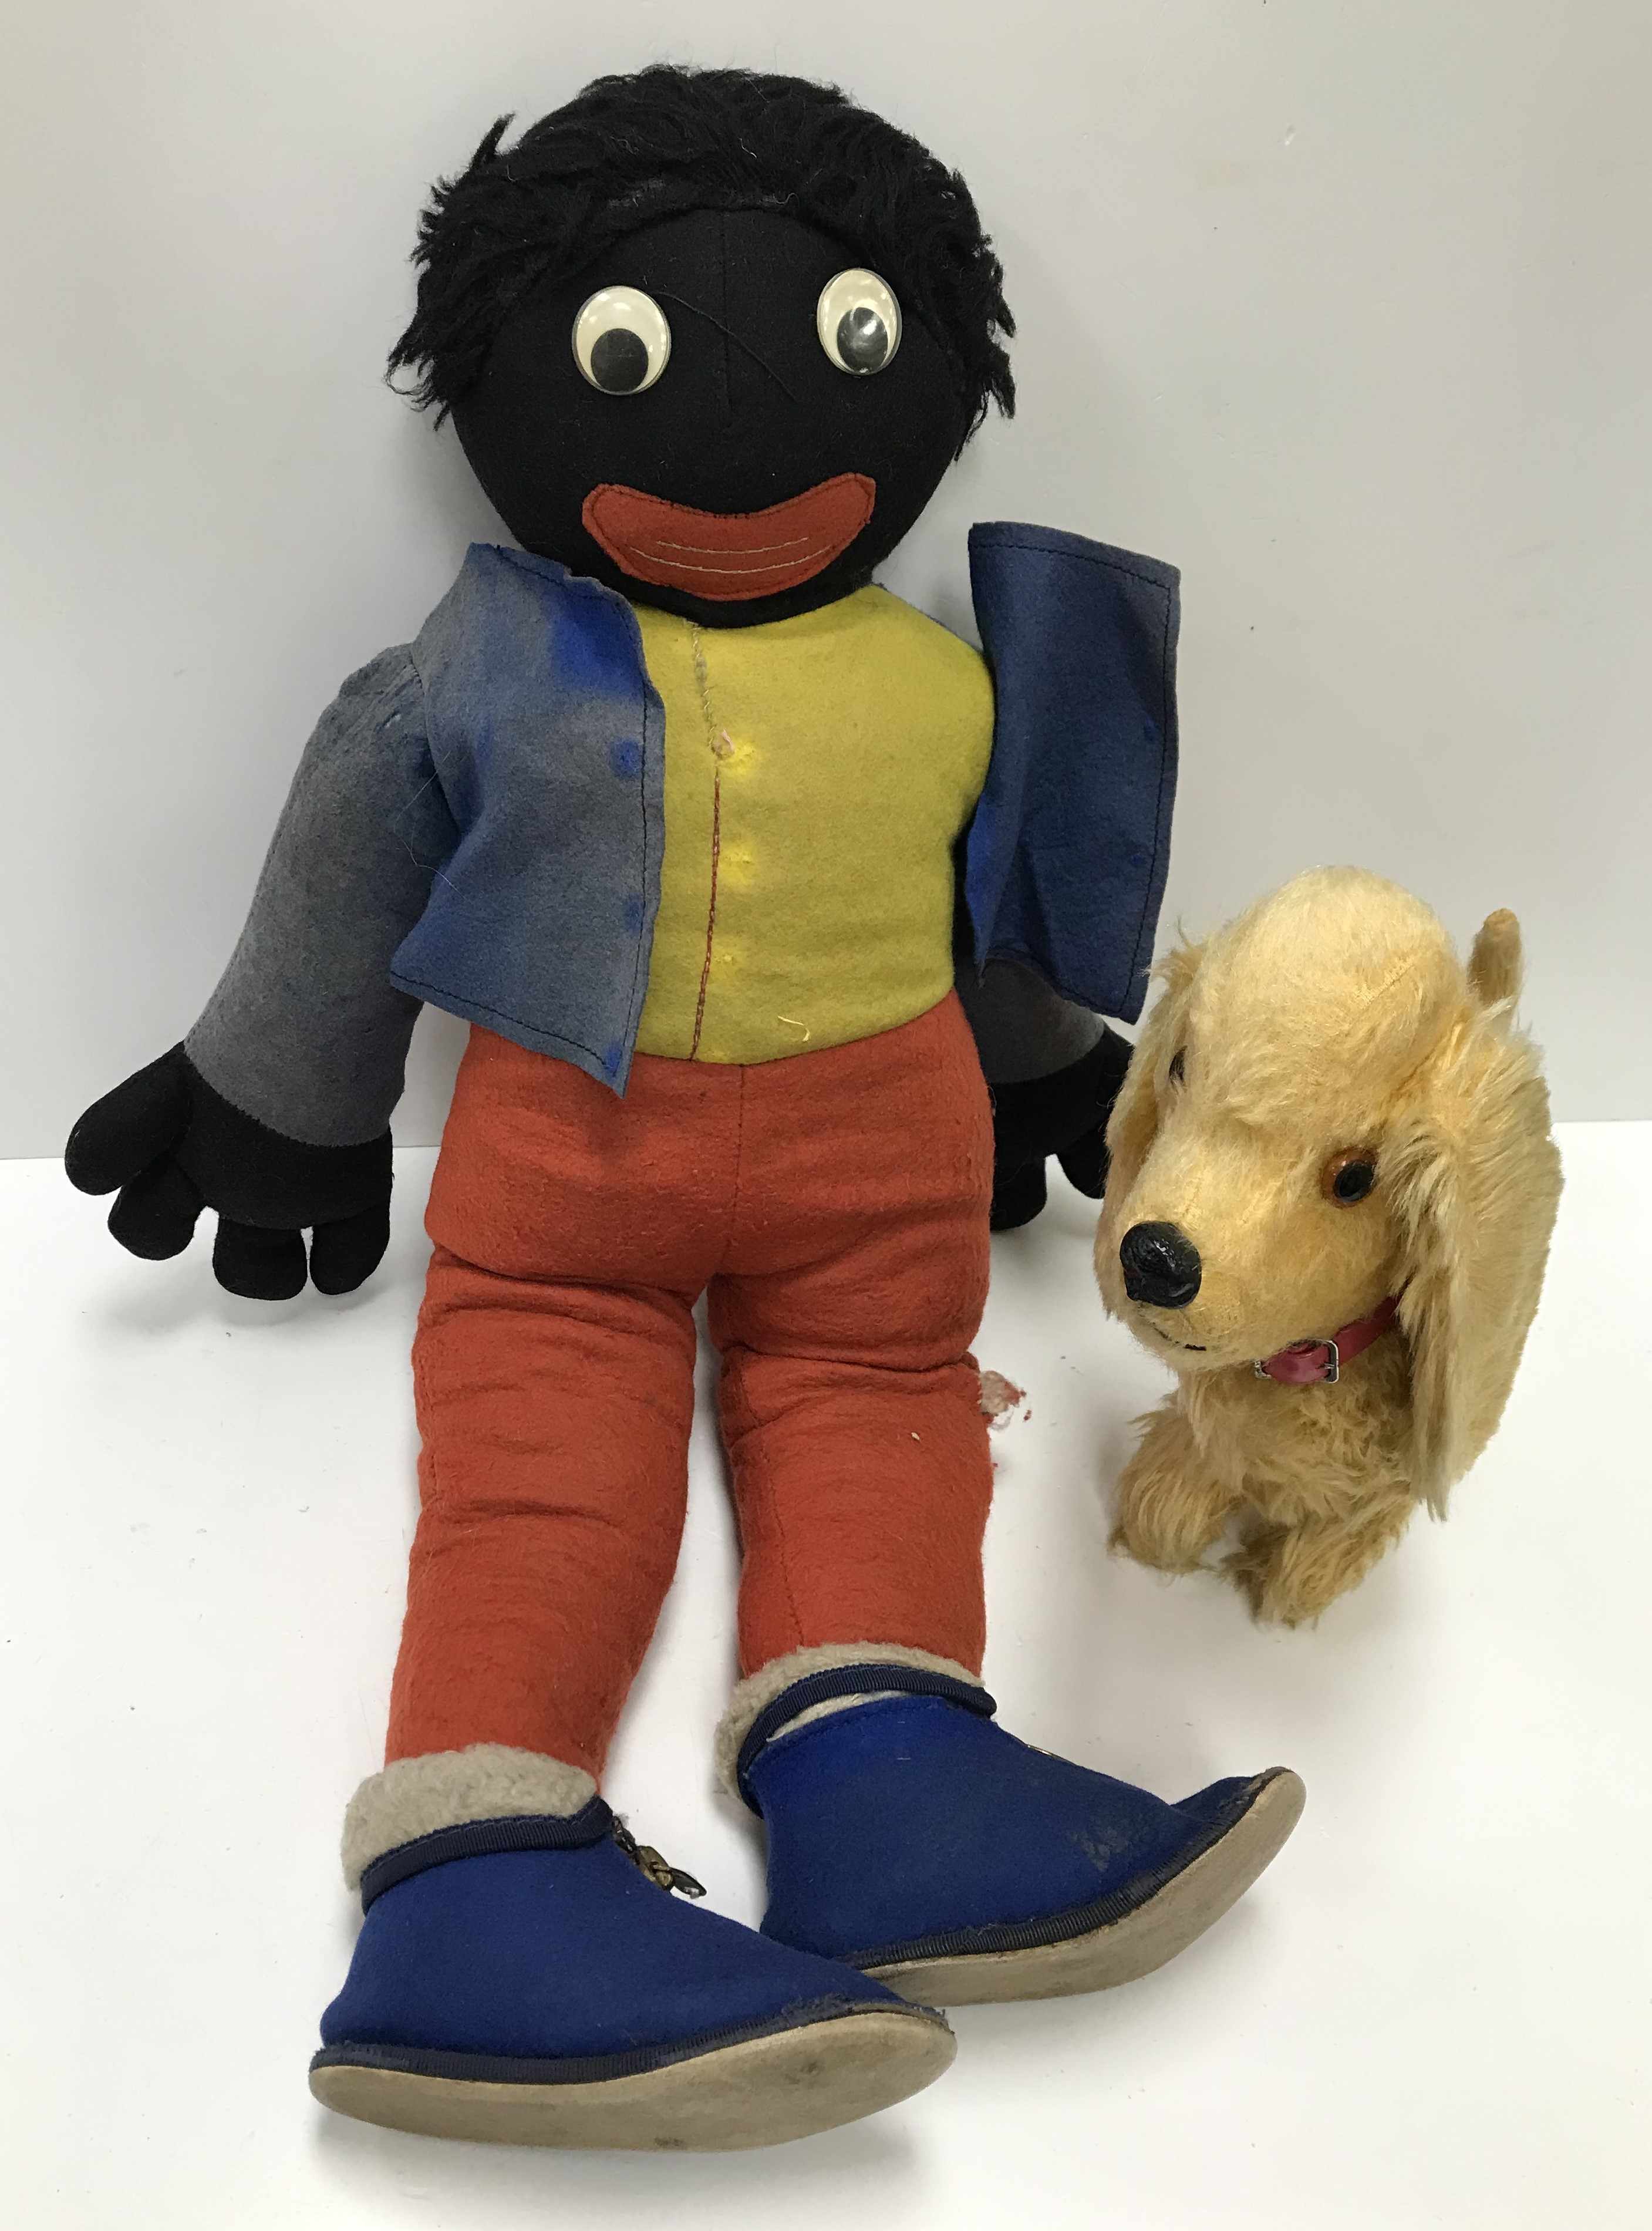 A felt covered soft "Golly" toy, 57 cm high and a Pedigree gold plush dog figure,